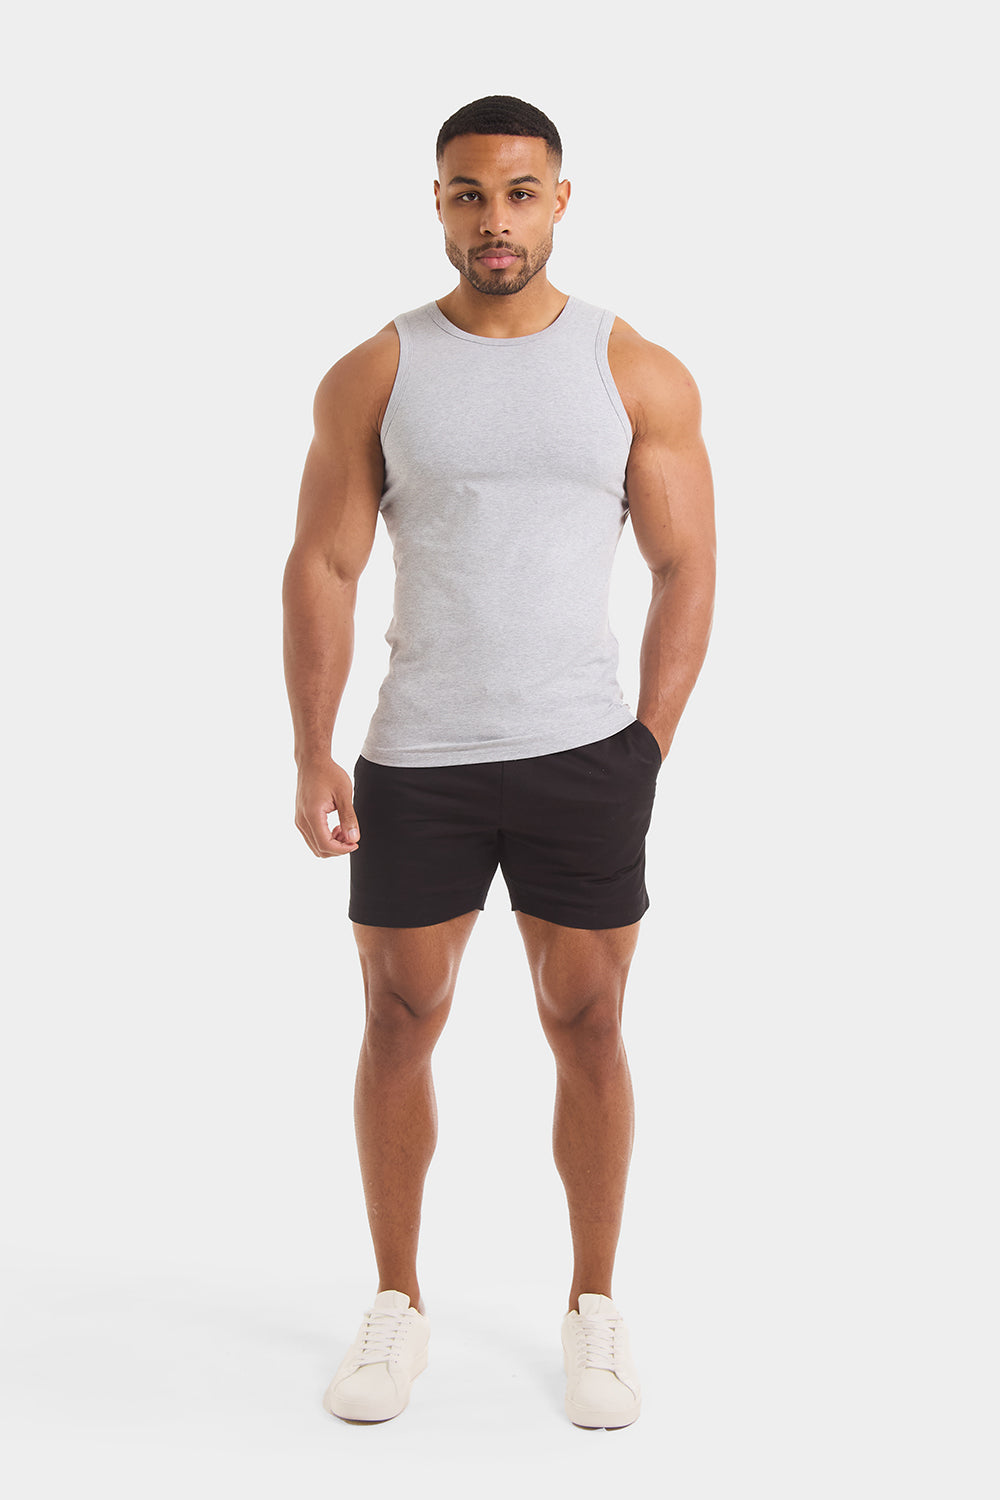 Muscle Fit Drawstring Chino Short - Shorter Length in Black - TAILORED ATHLETE - ROW